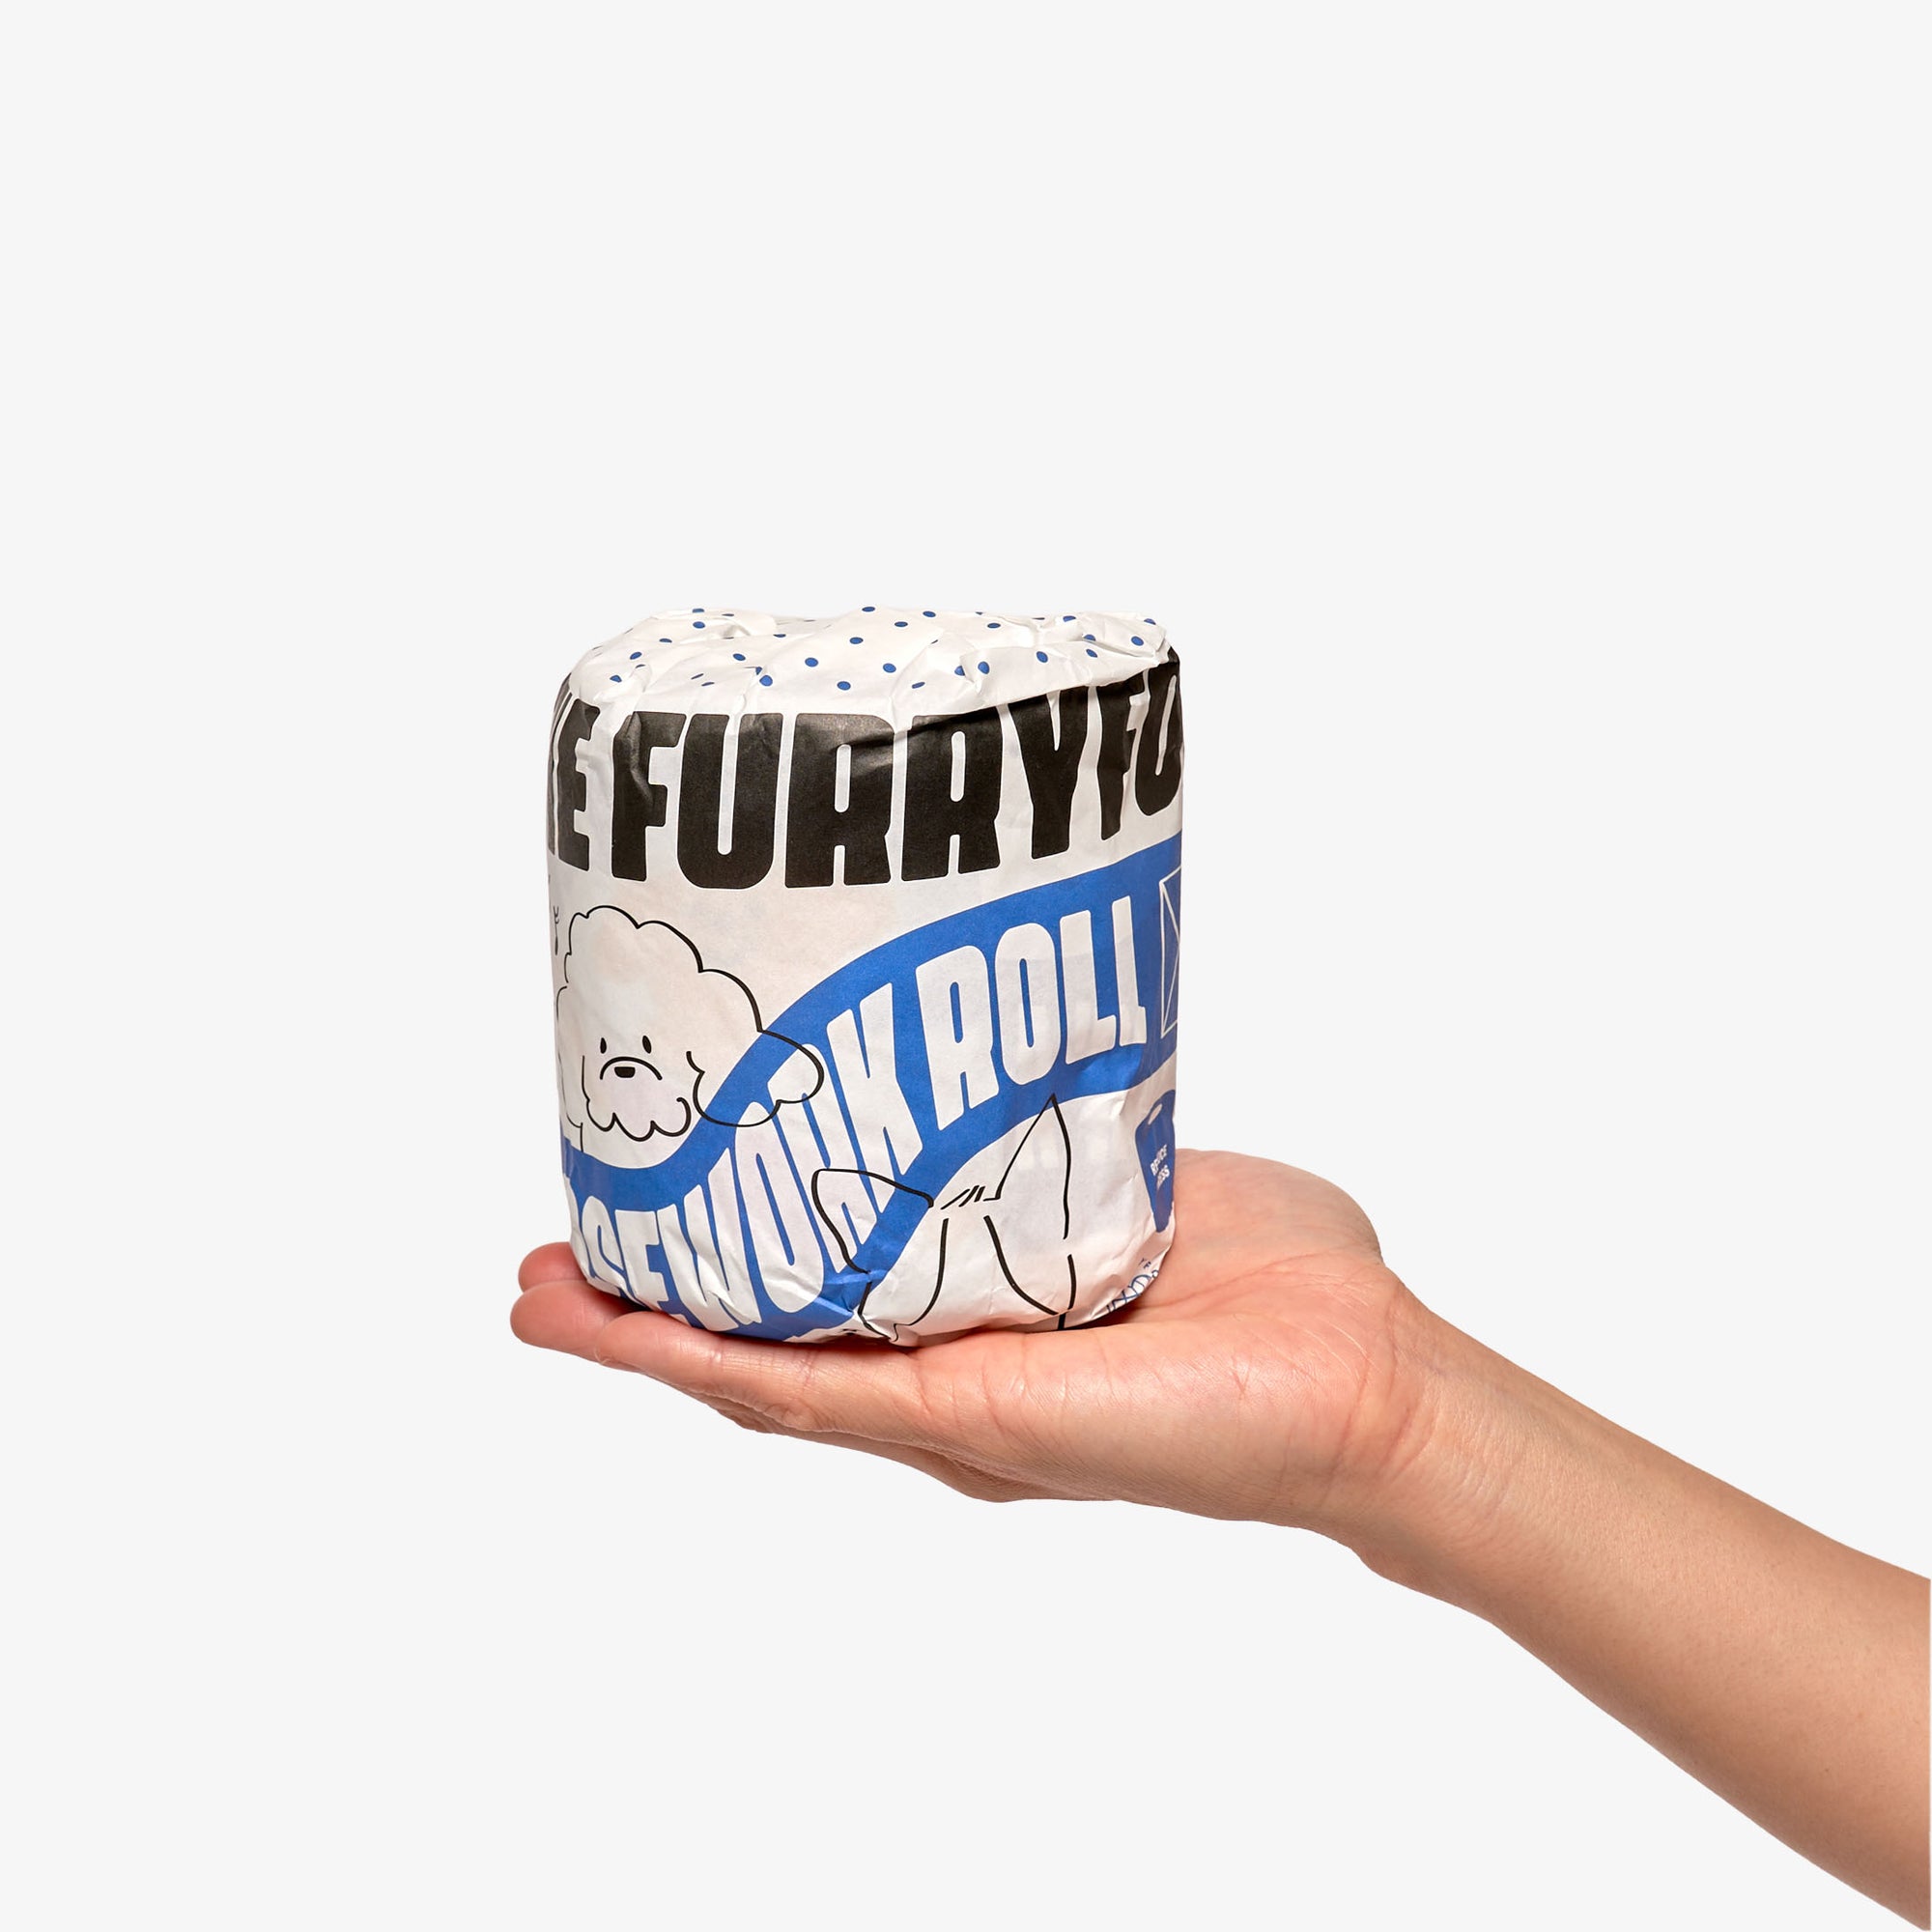 The image shows a hand holding a rolled-up dog toy with a graphic design featuring the text "THE FURRYFOLKS NOSEWORK ROLLS" and an illustration of a fluffy dog. The toy has a blue and white color scheme with a polka dot pattern, and it appears to be made of a fabric material. This design suggests it's part of a line of dog toys focused on scent work and mental stimulation. The neutral background ensures the toy is the central point of focus.